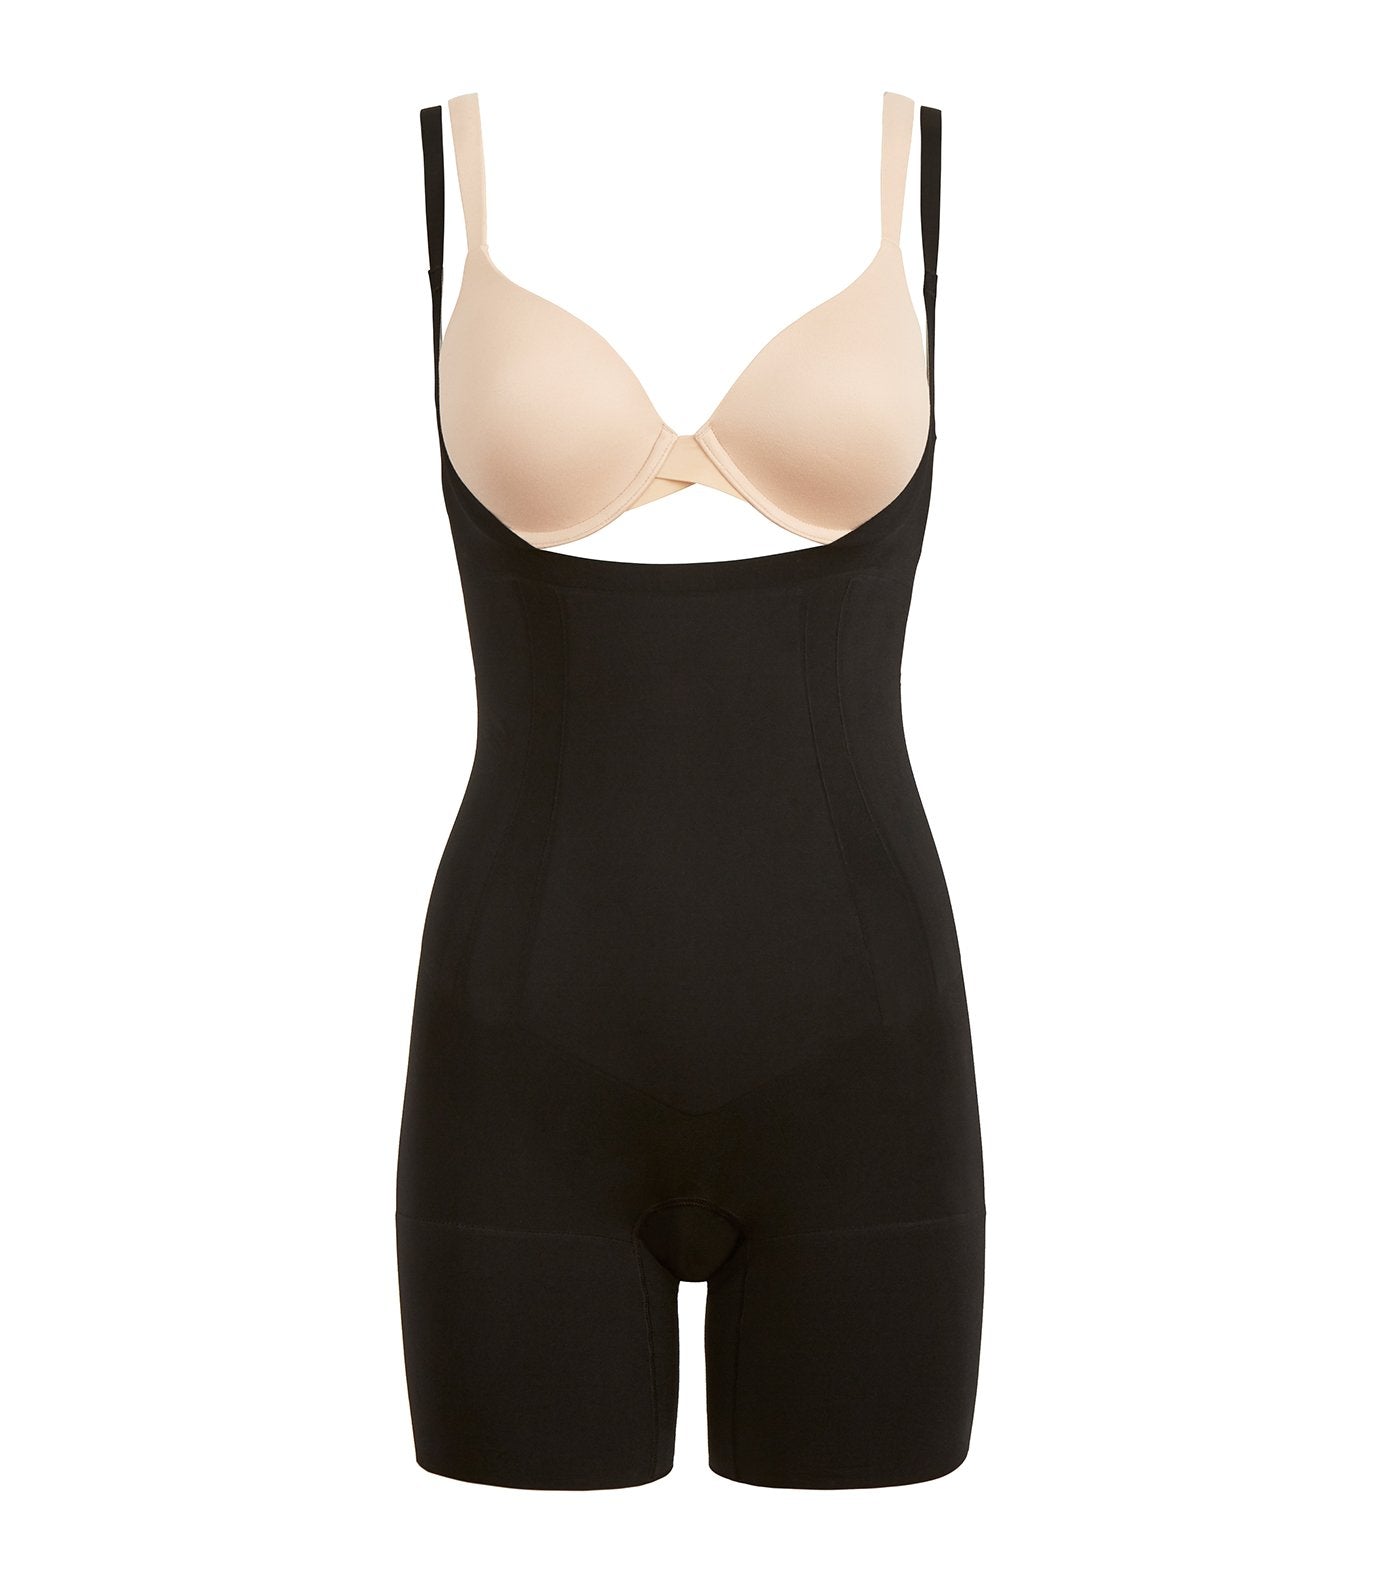 Maidenform Easy Up Firm Control Bodybriefer,,Latte Lift,,40C